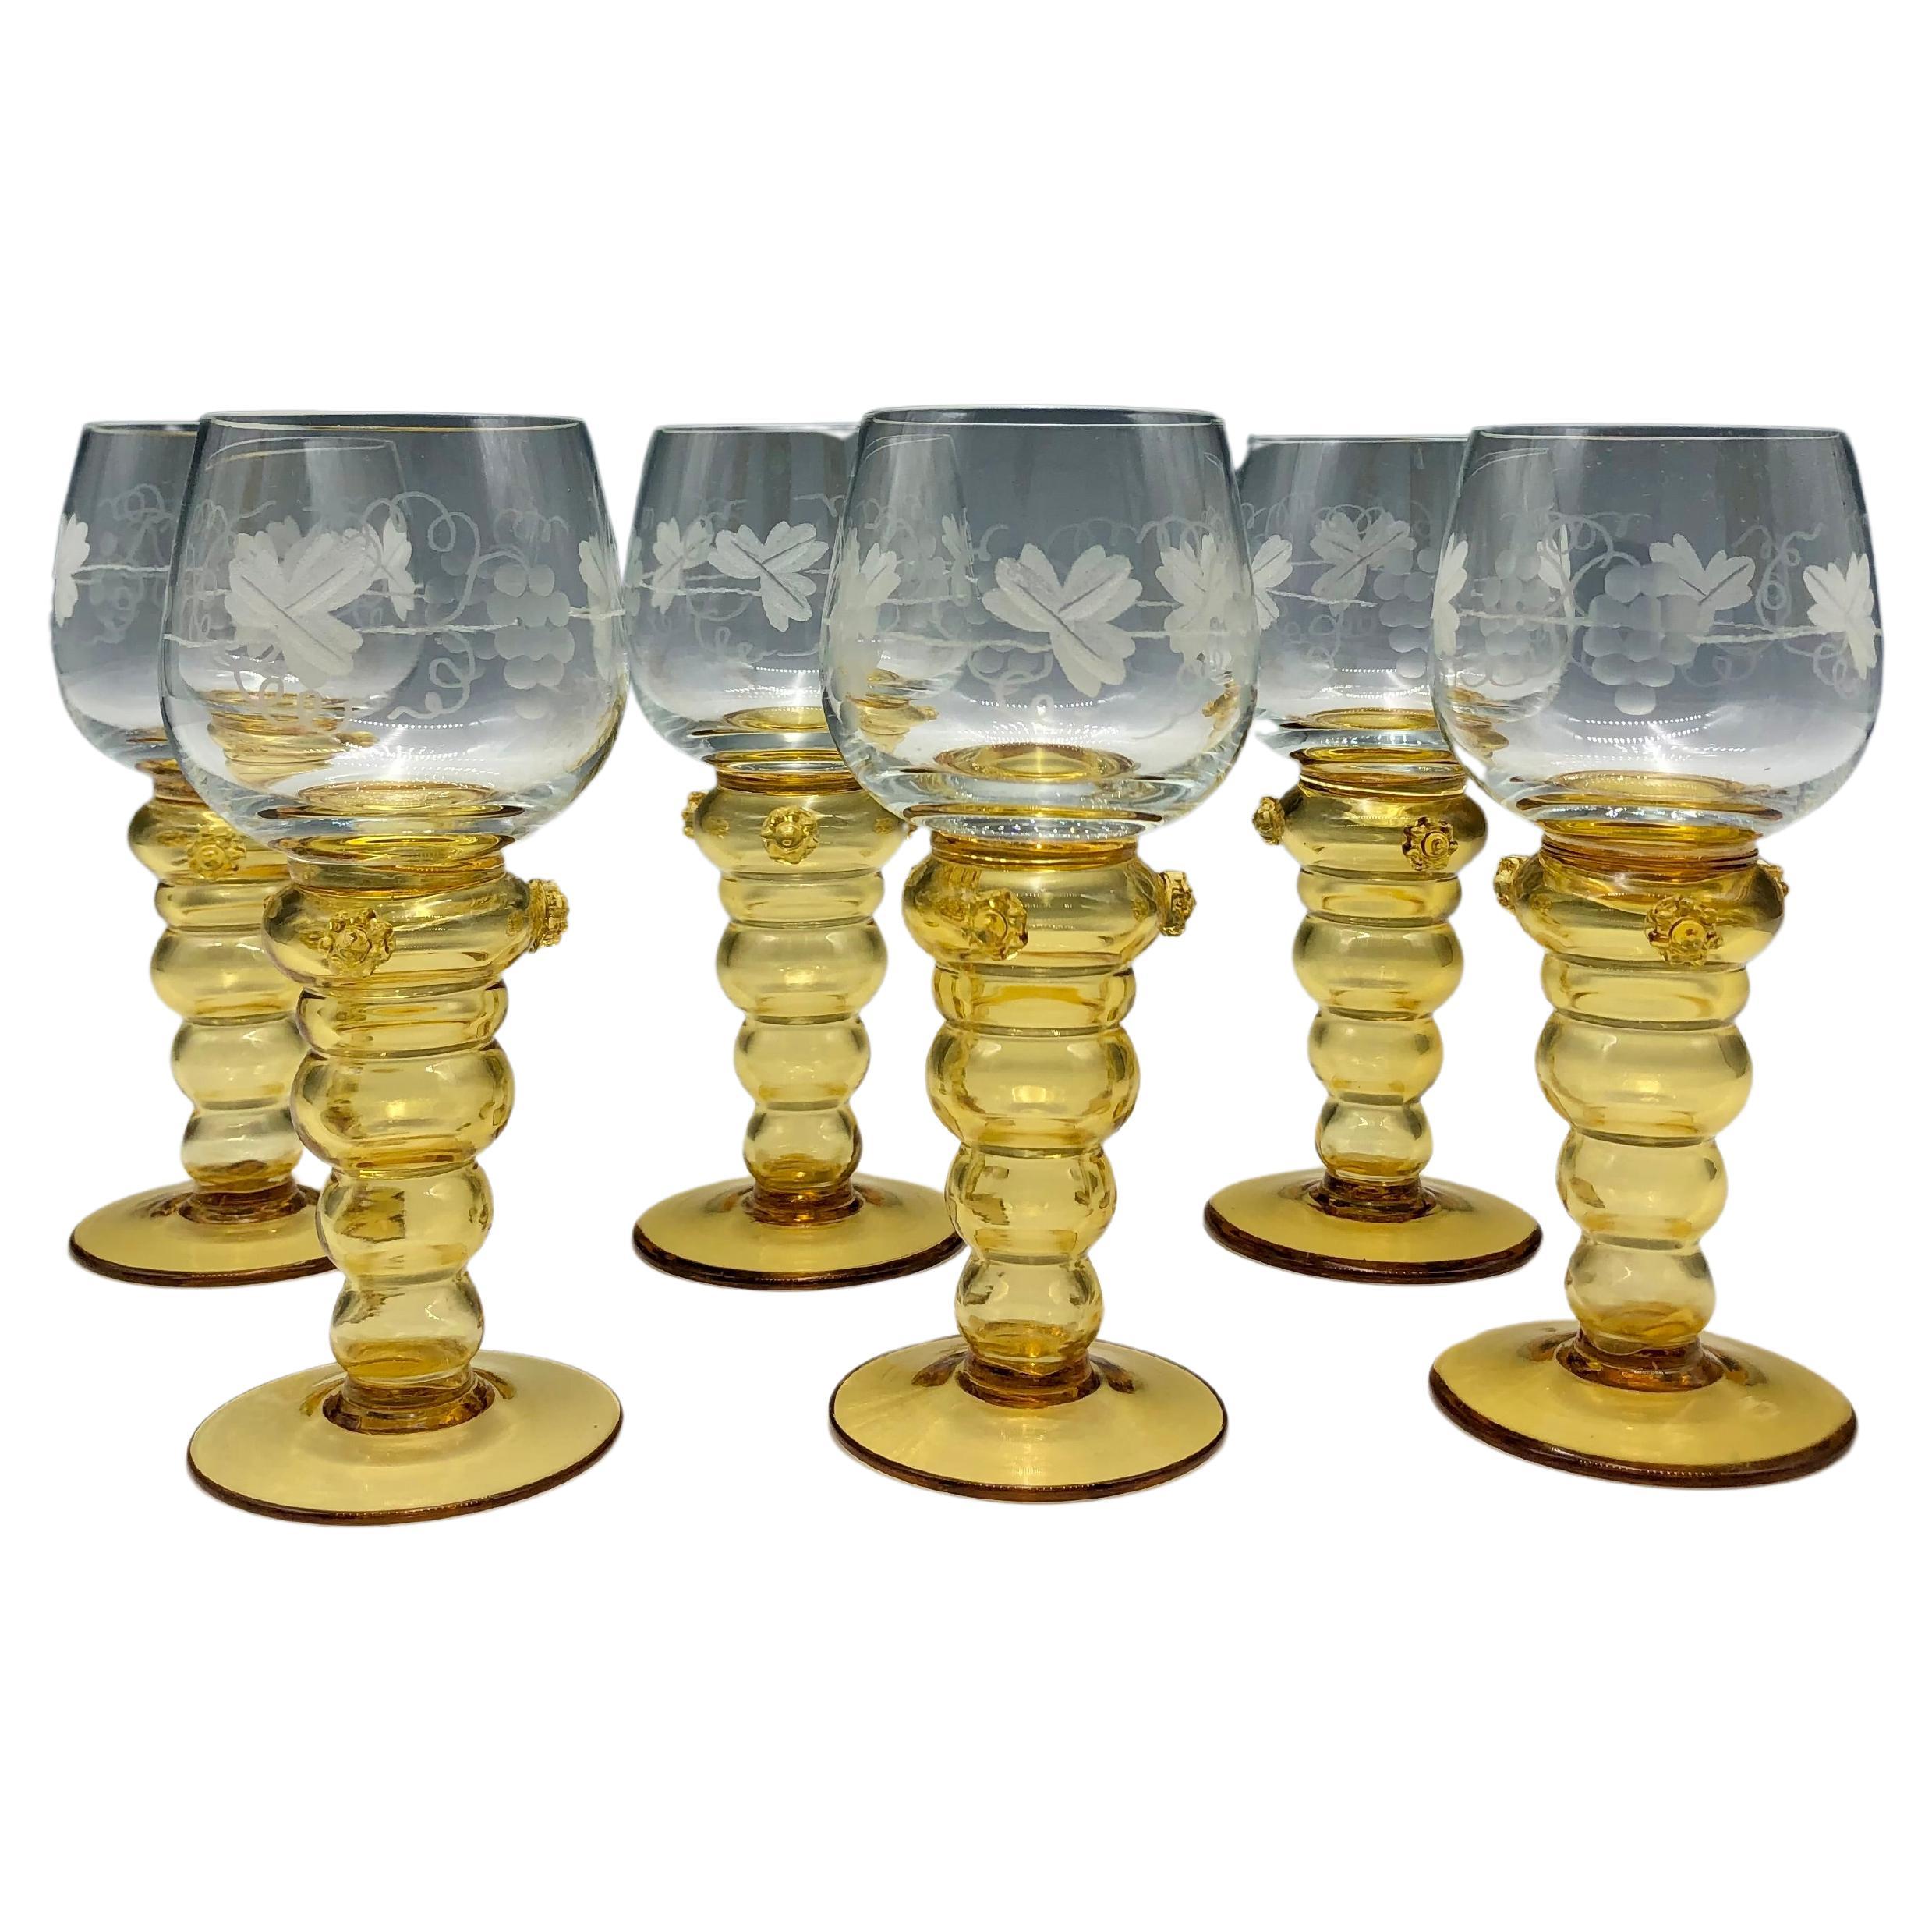 Vintage Hand Blown Theresienthal Roemer Wine Glasses with Amber Stems